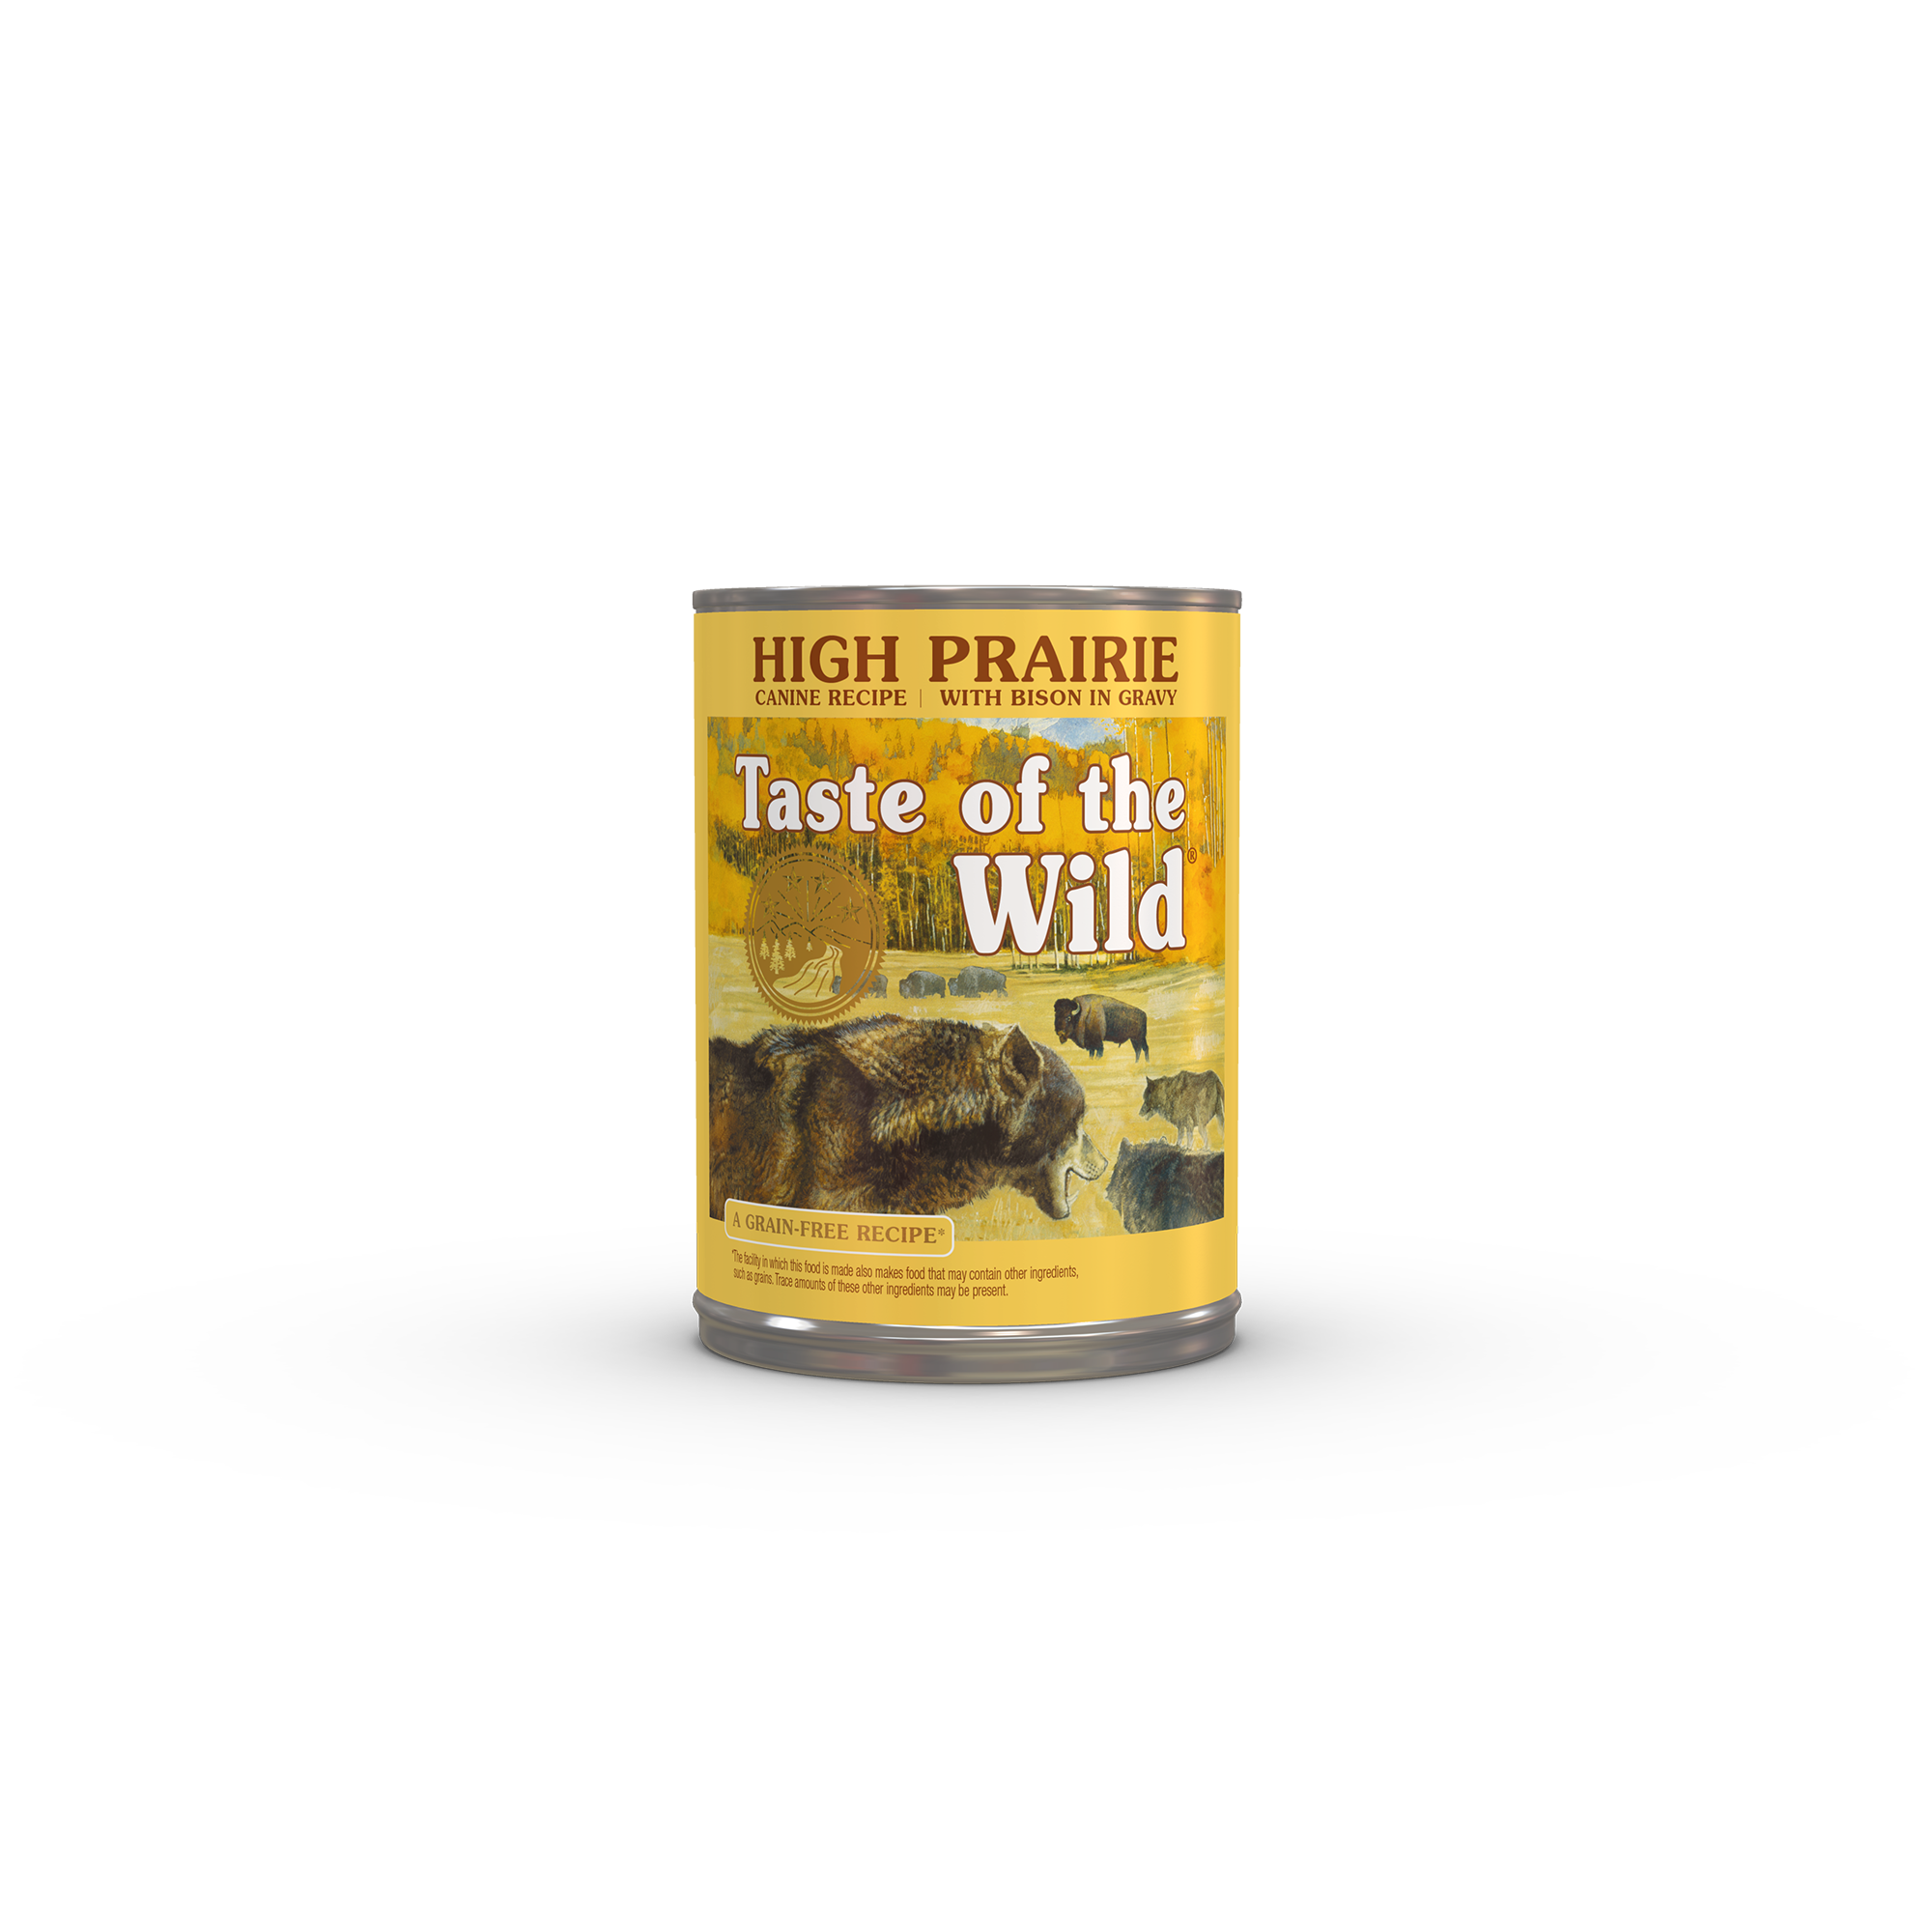 High Prairie Canine Recipe with Bison in Gravy package